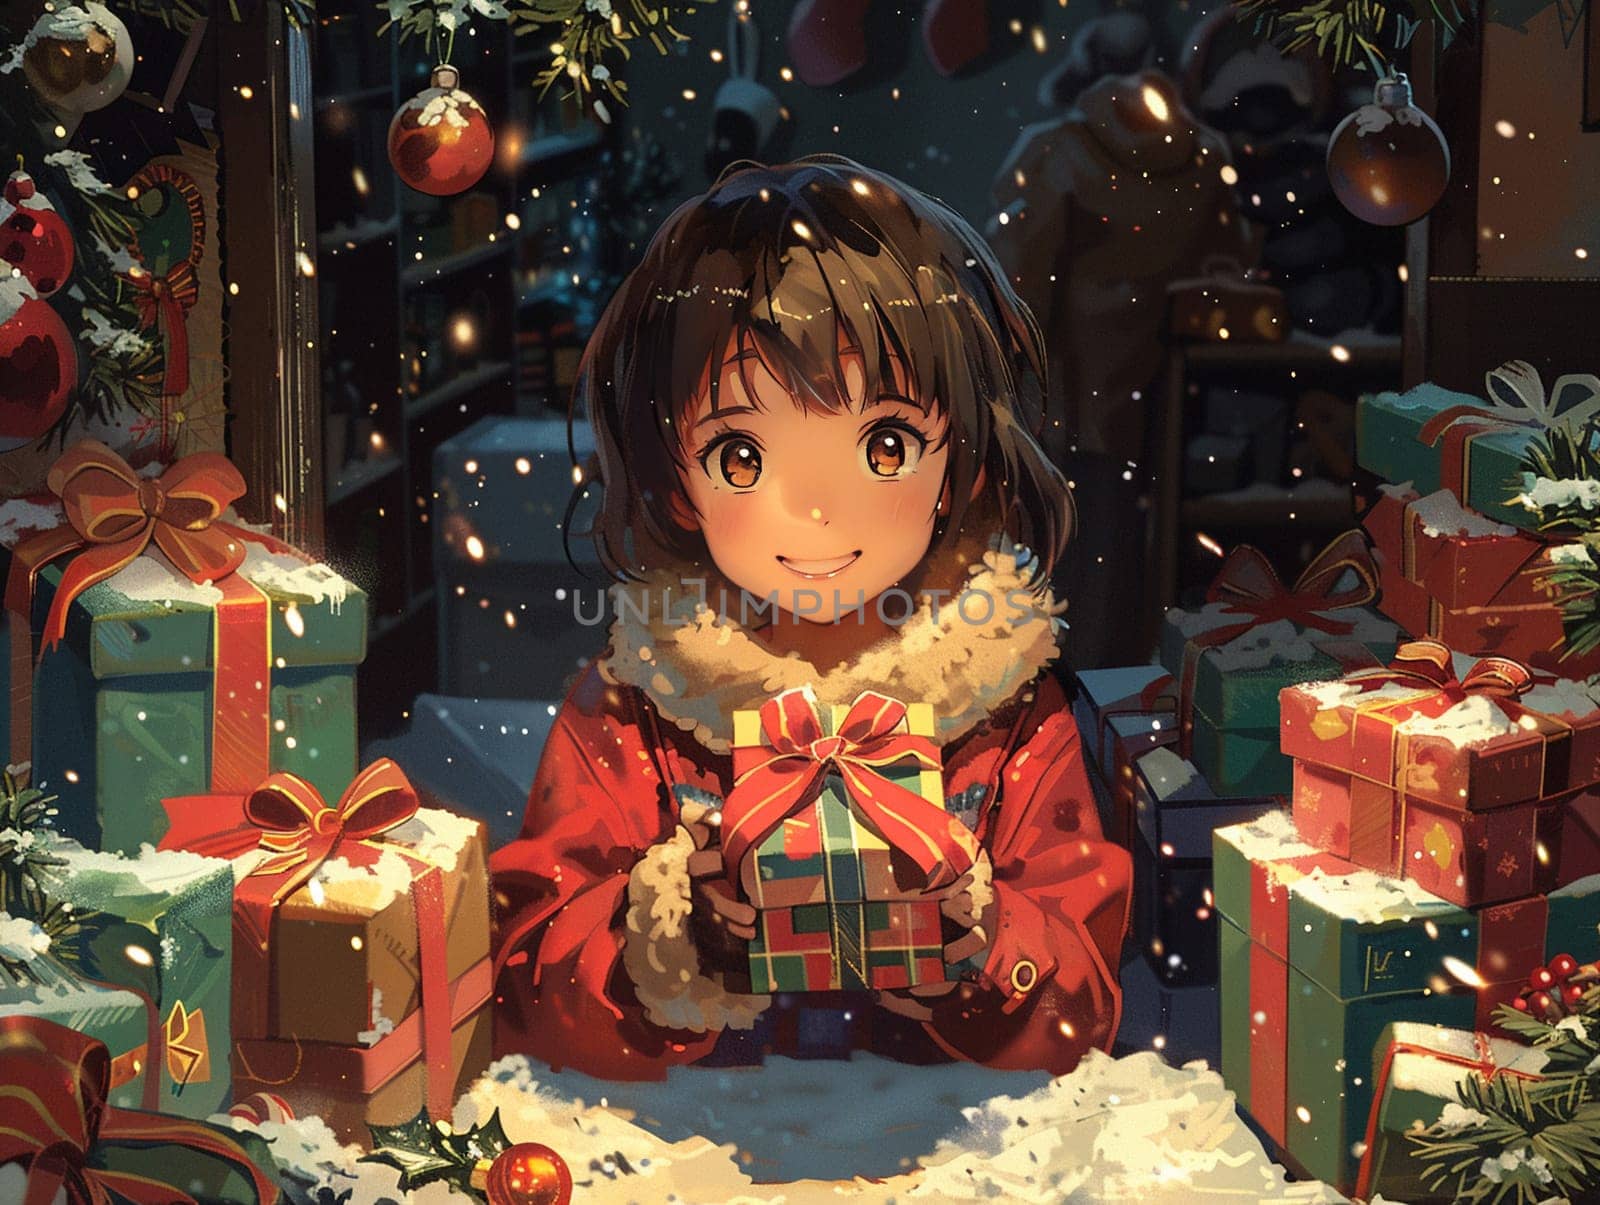 Christmas morning unwrapping gifts, anime illustration capturing joy and surprise.